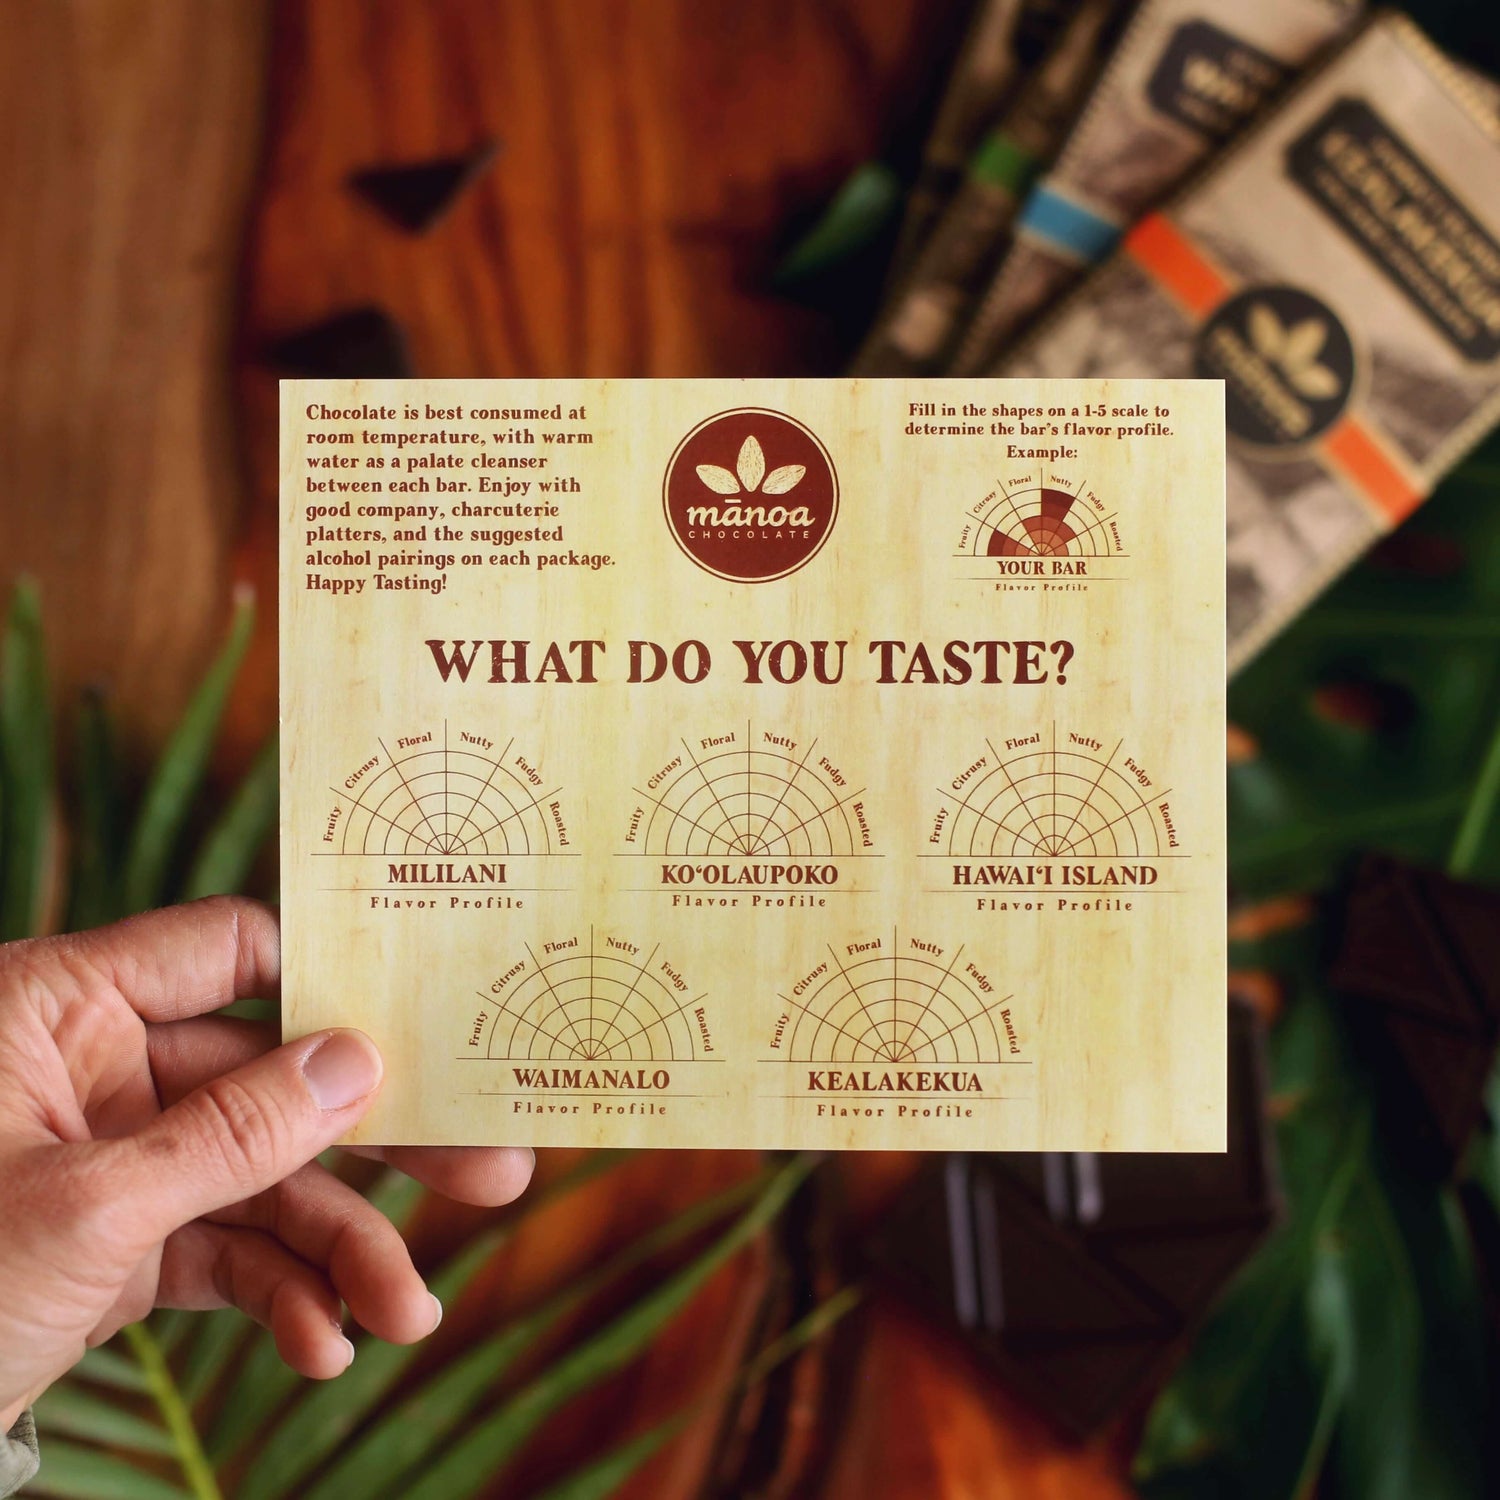 Image of informational tasting card that comes with the Hawaiian Grown box